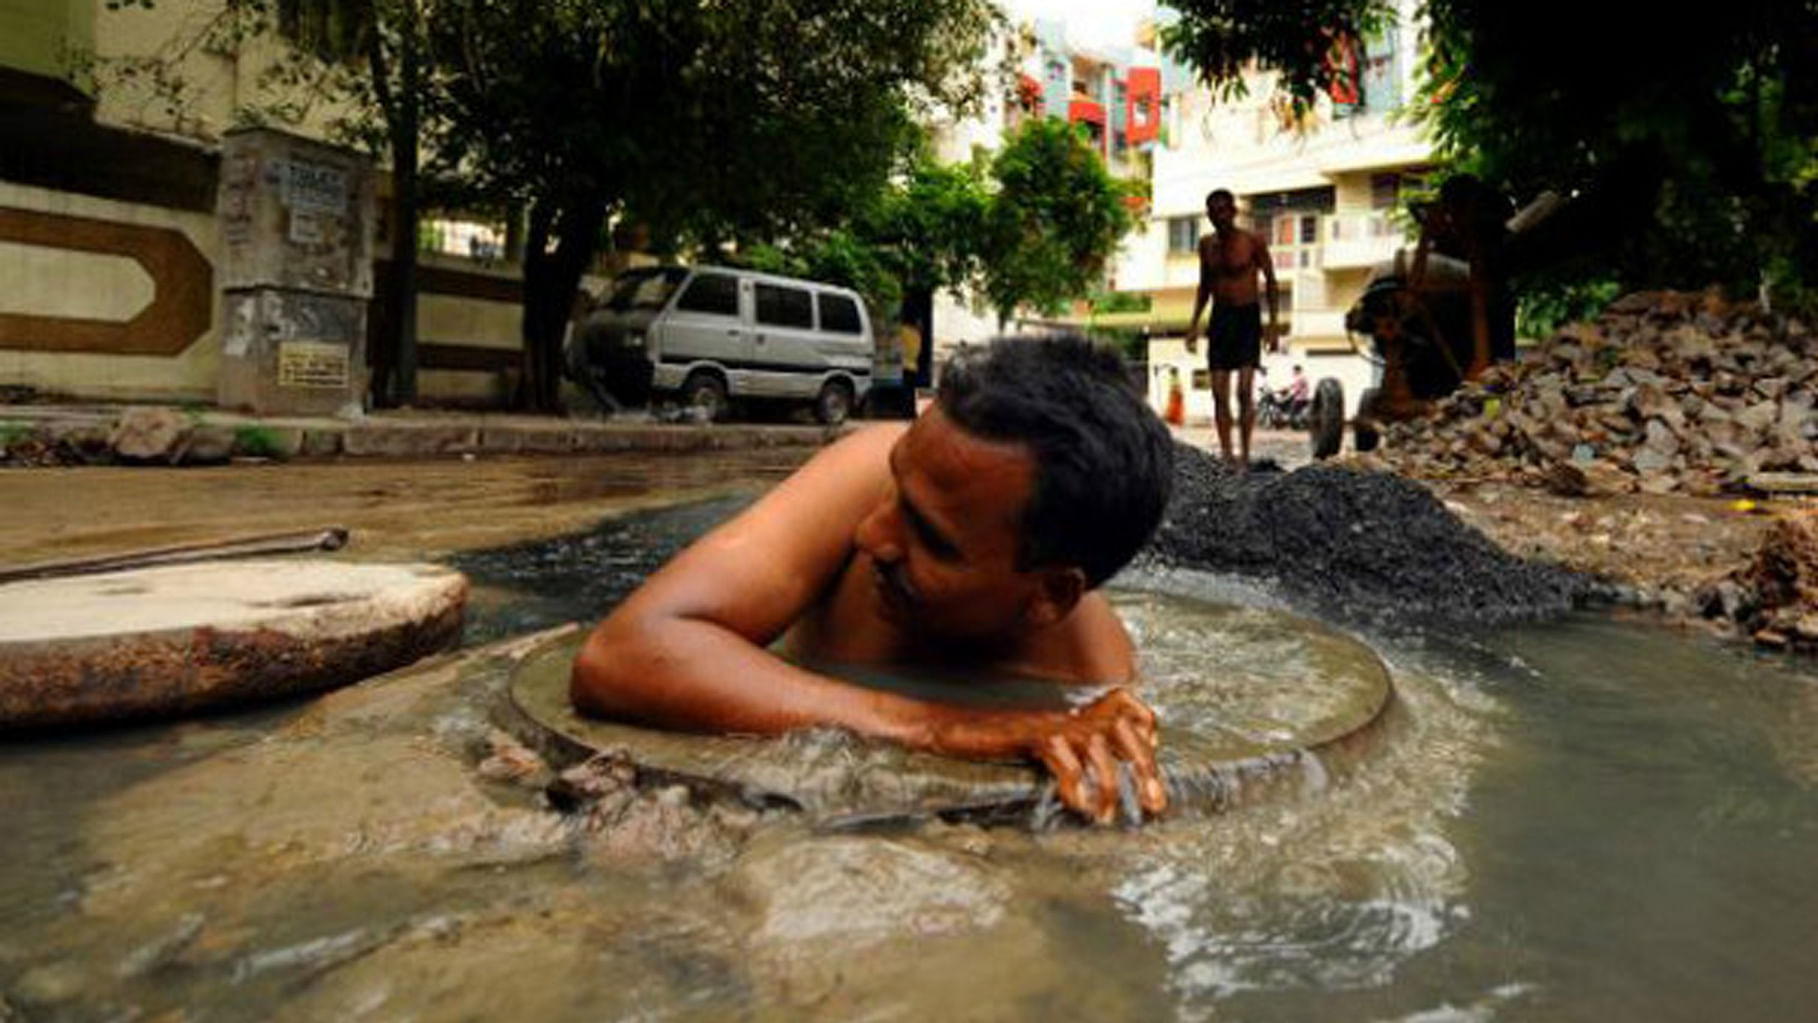 Sanitation workers are forced to work without any protective apparatus. (Photo Courtesy: The News Minute)